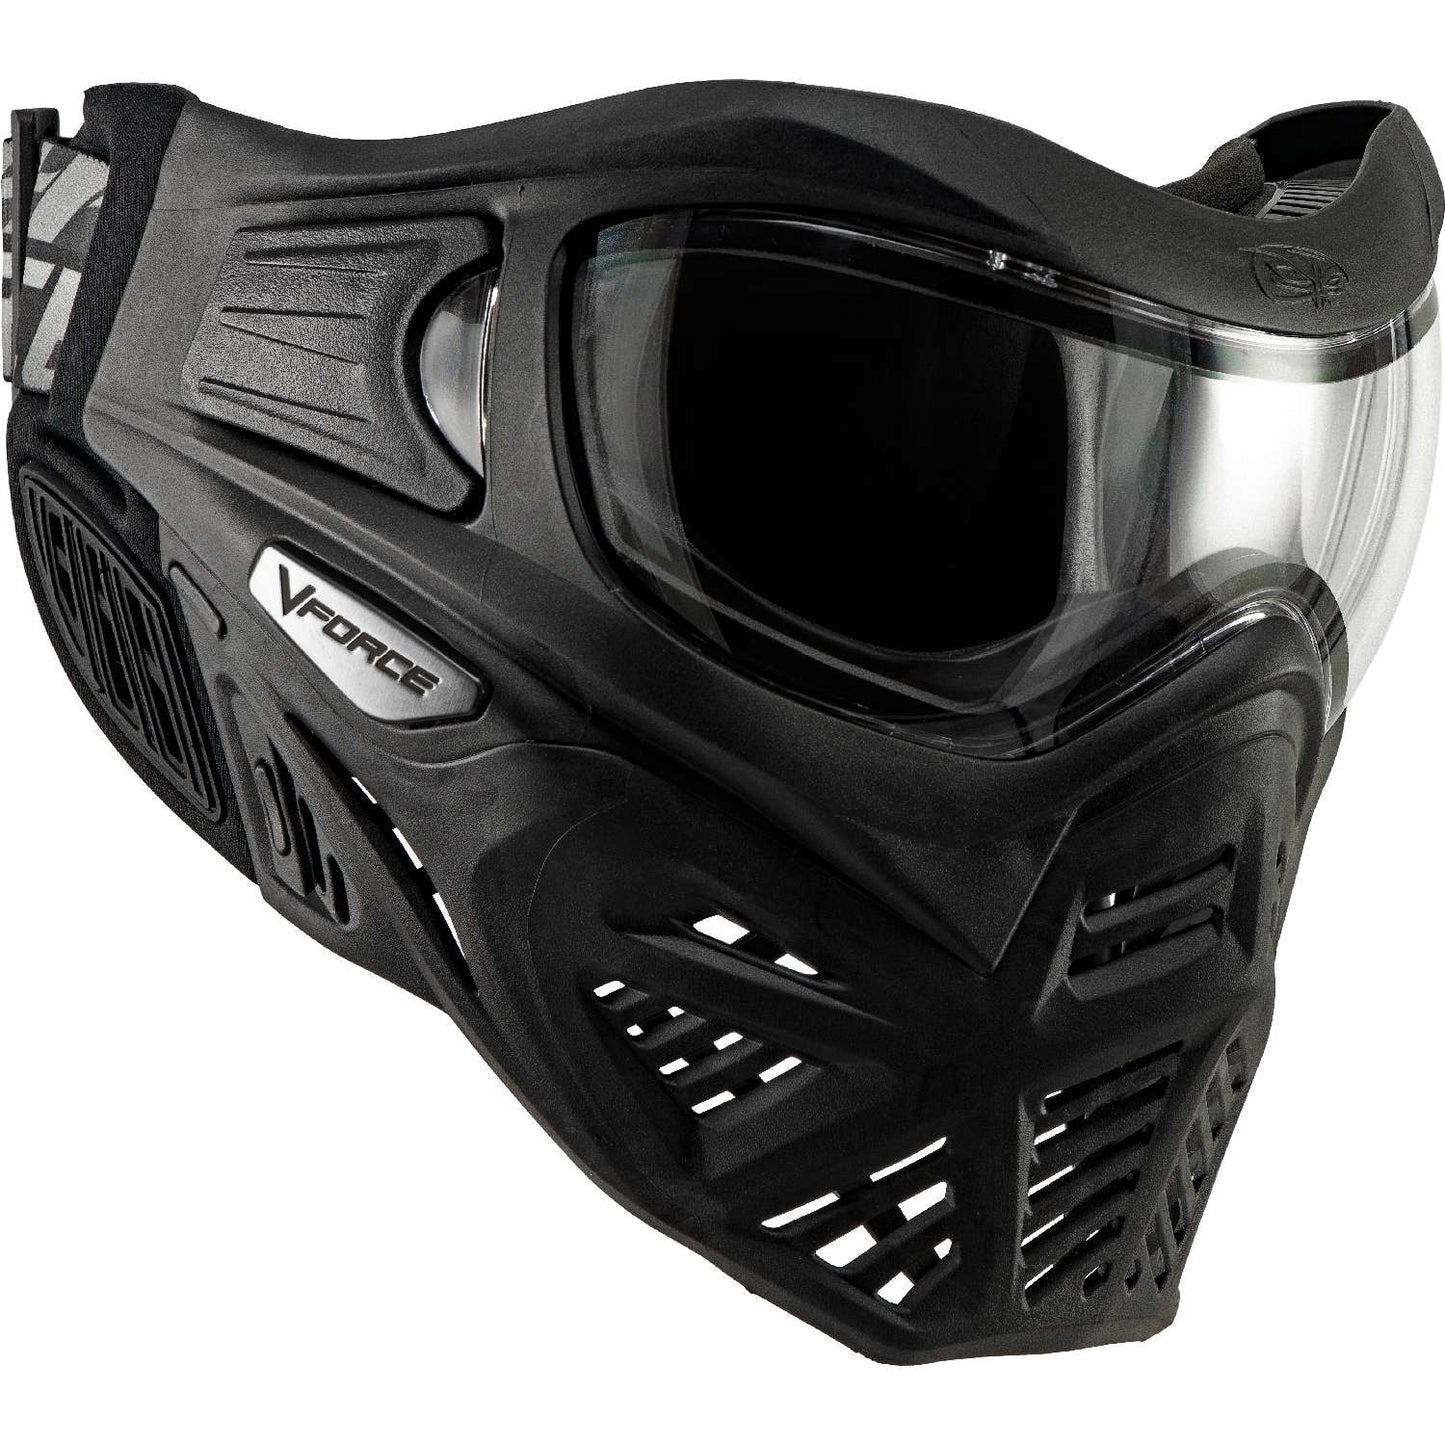 VForce Grill 2.0 - Black/Black - with visor and lens [Thermal Clear]